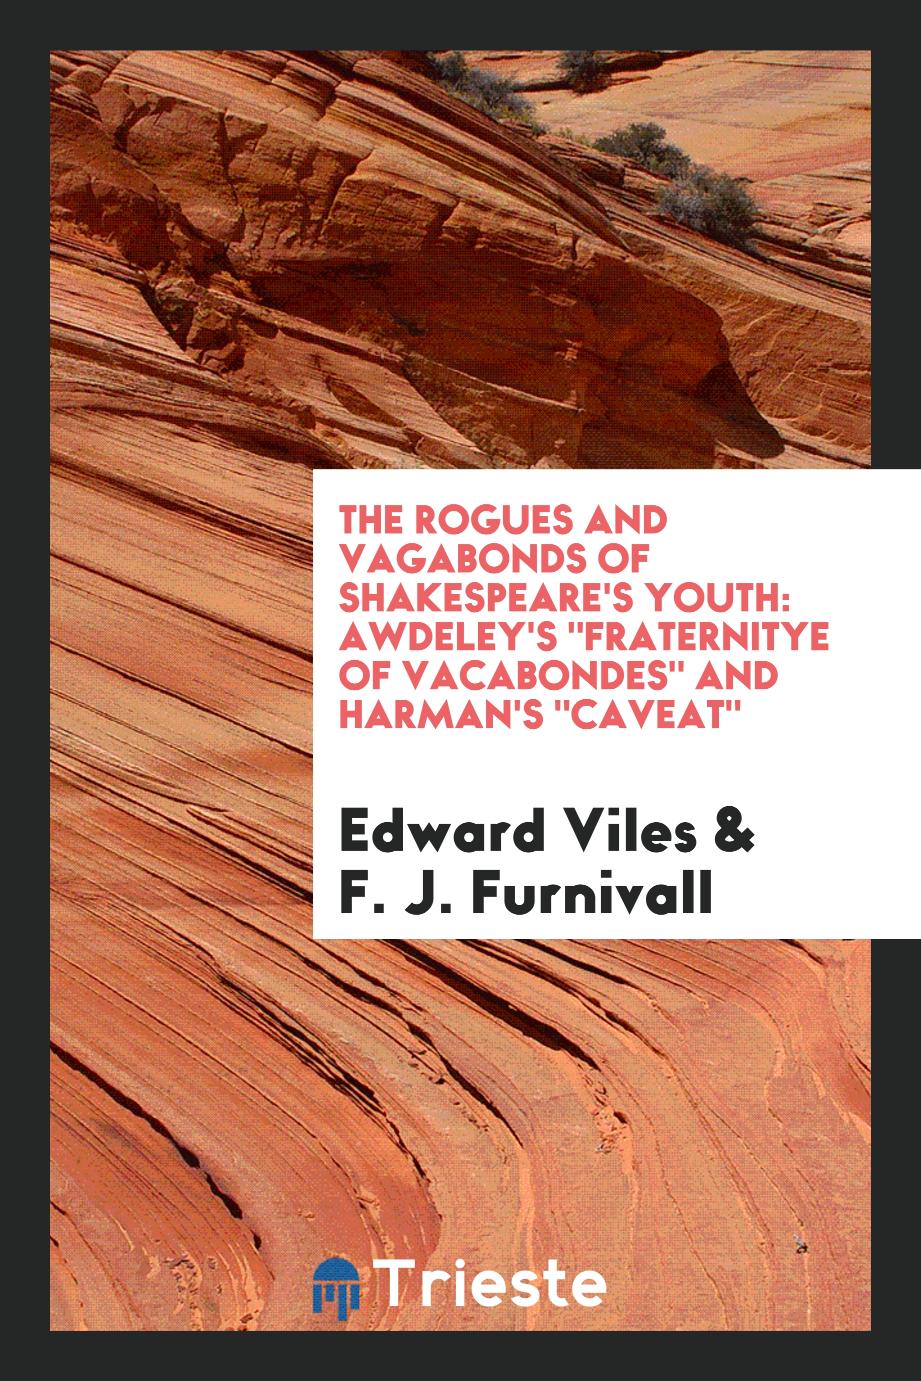 The rogues and vagabonds of Shakespeare's youth: Awdeley's "Fraternitye of vacabondes" and Harman's "Caveat"